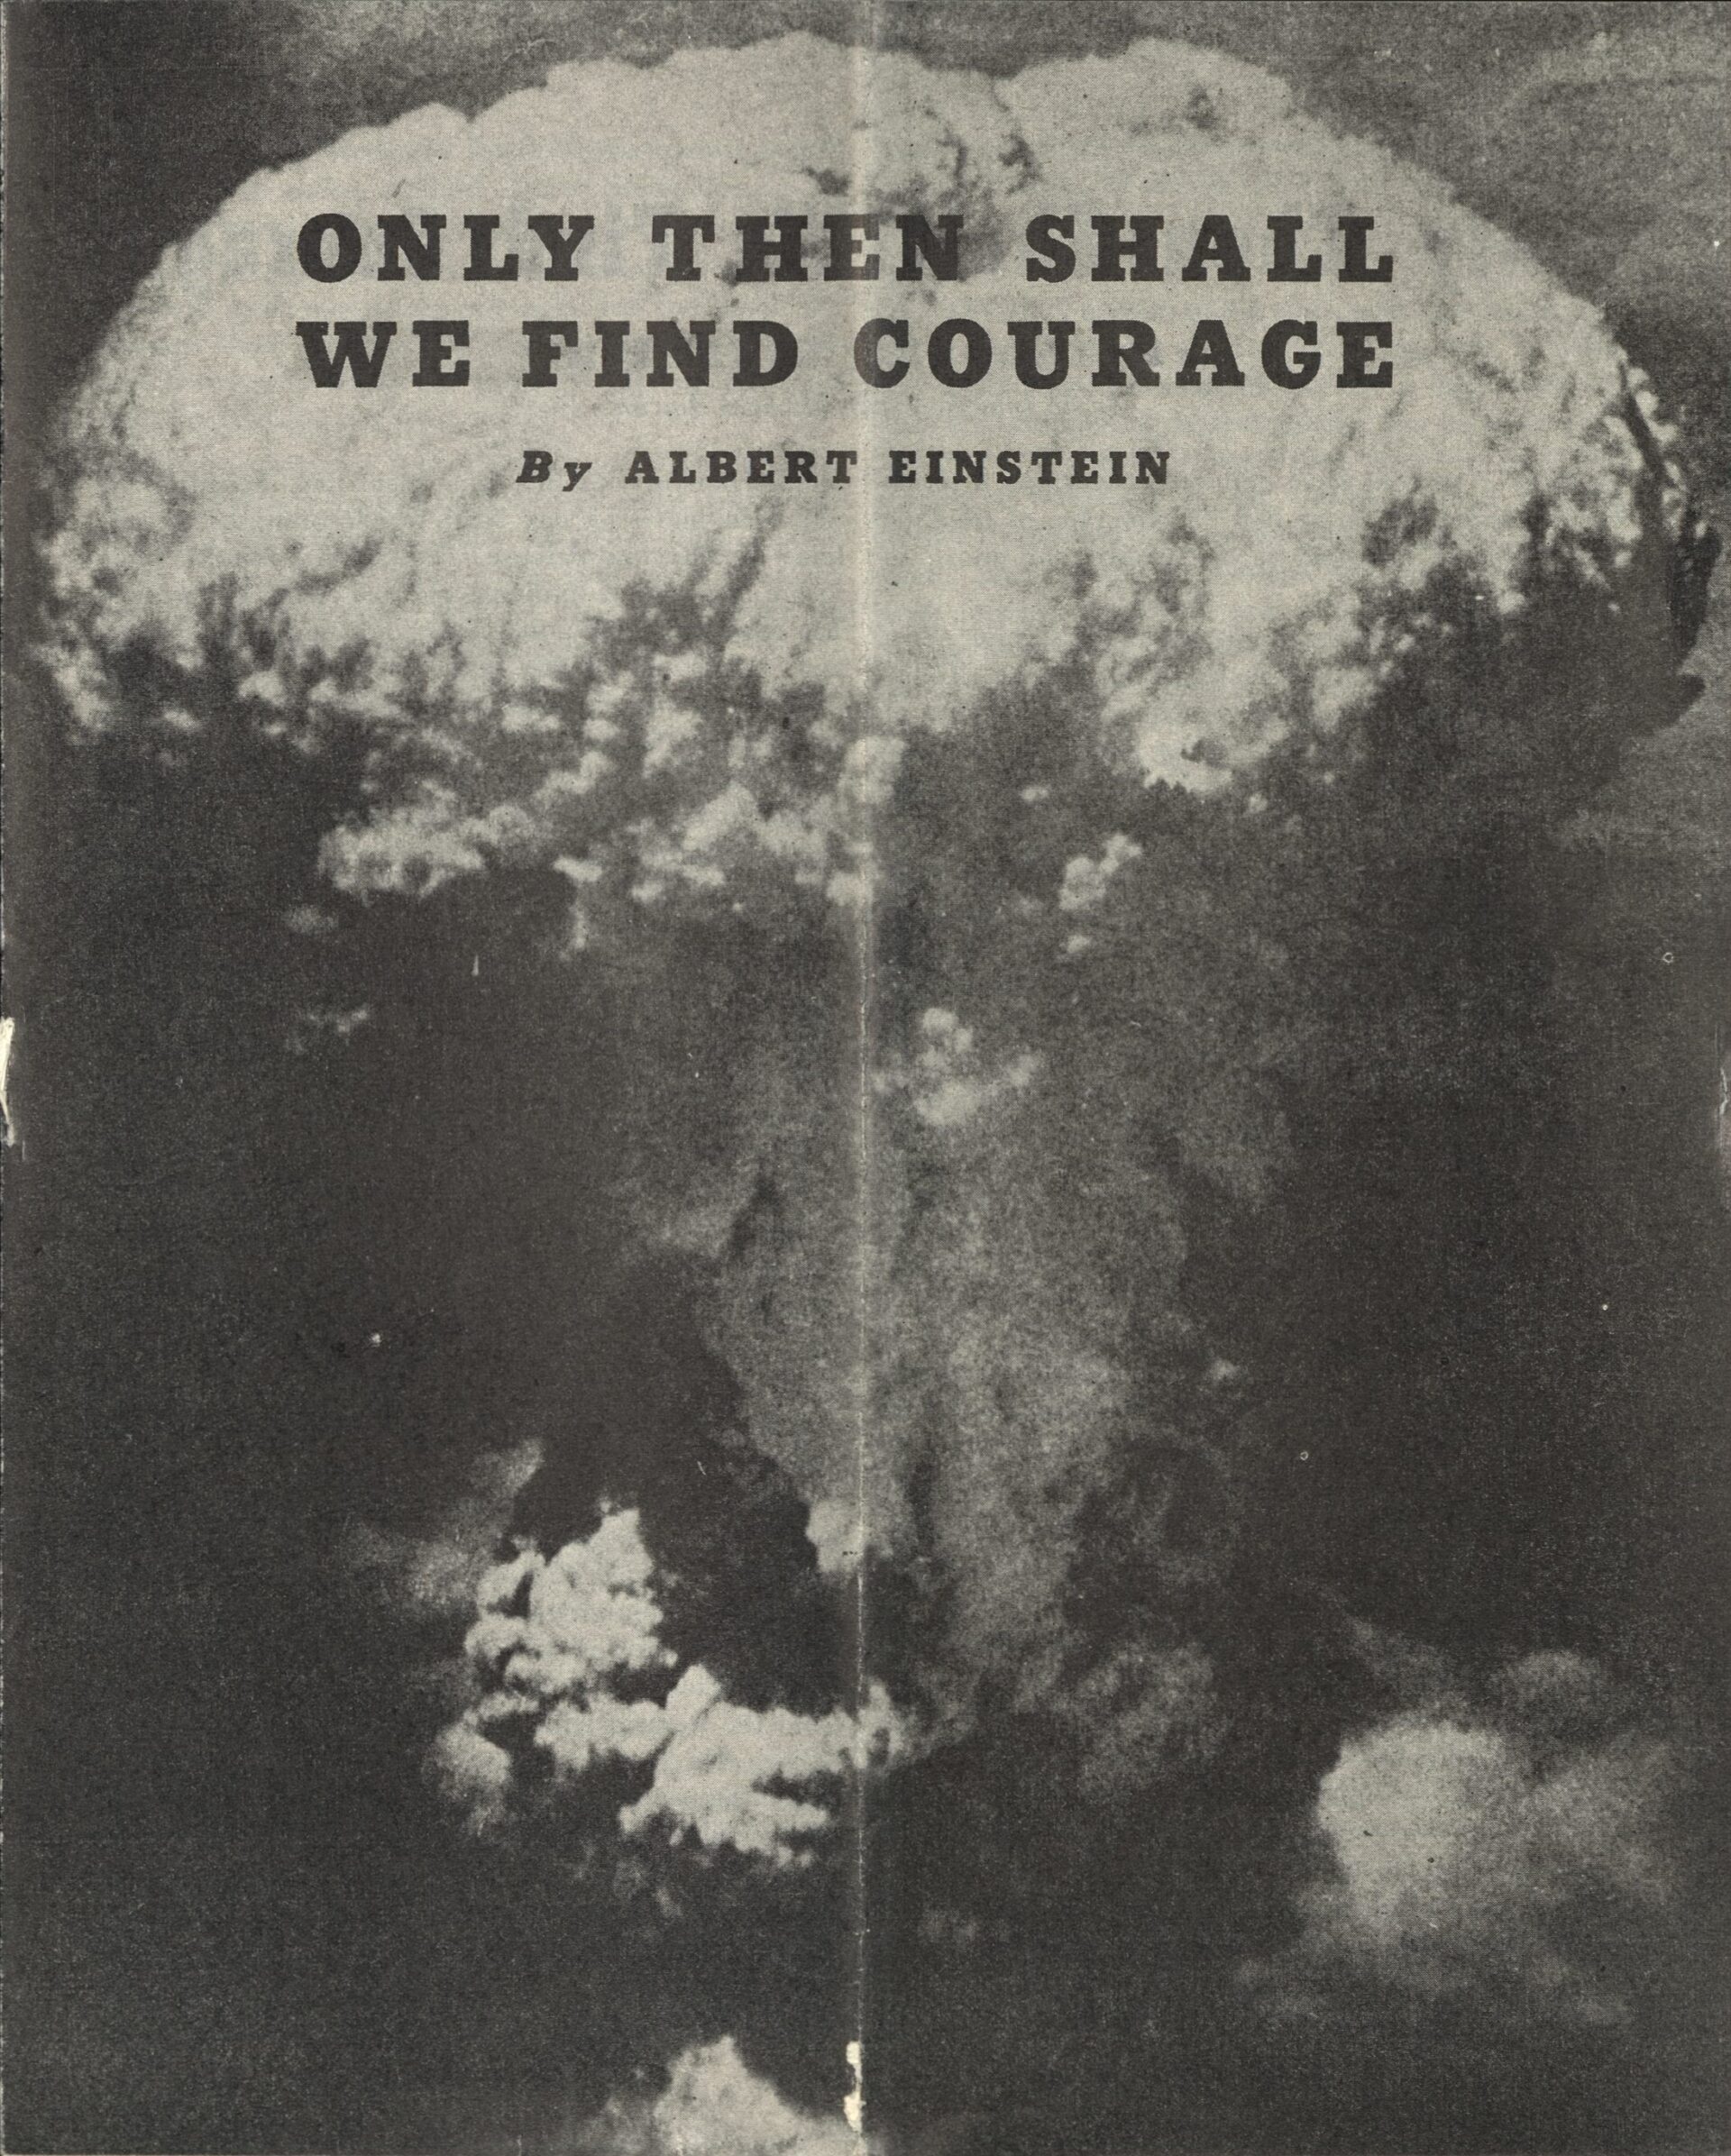 Einstein's "Only Then Shall We Find Courage" – Copyright 2014, Special Collections & Archives Research Center Oregon State University Libraries and Press.